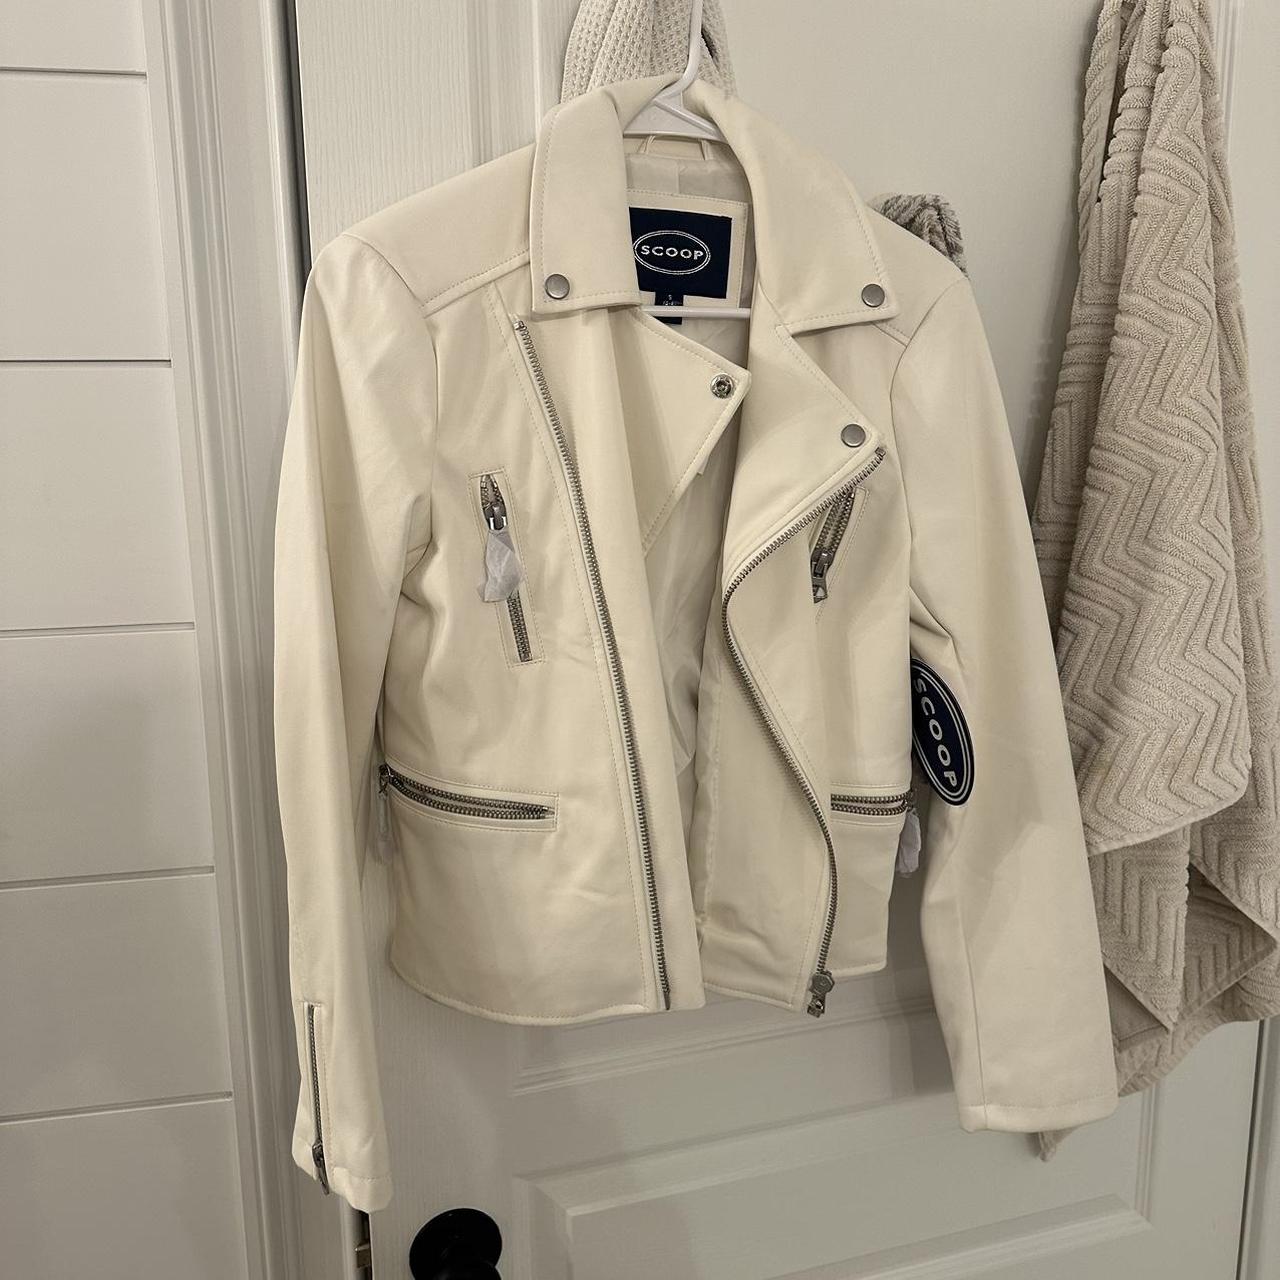 NWT white leather jacket - the back is supposed to... - Depop